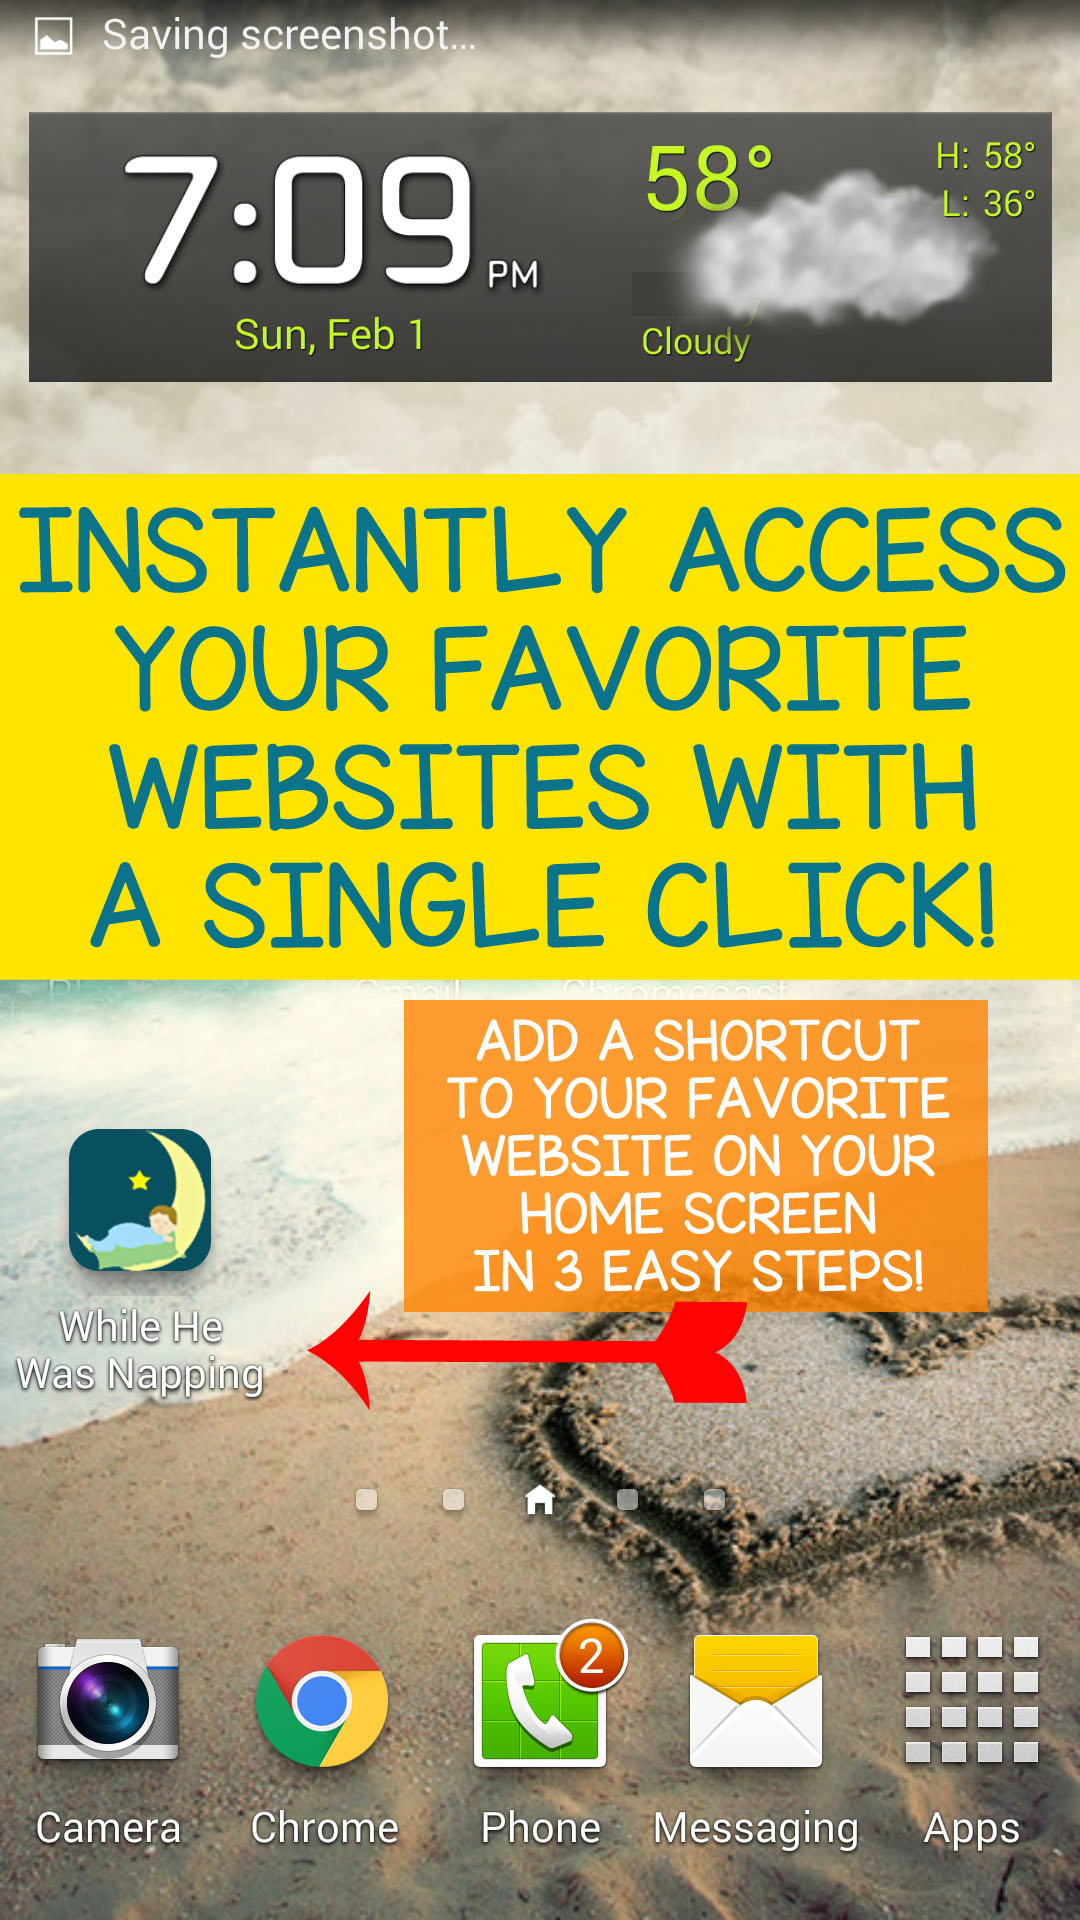 How to Instantly Access Favorite Websites From Your Phone